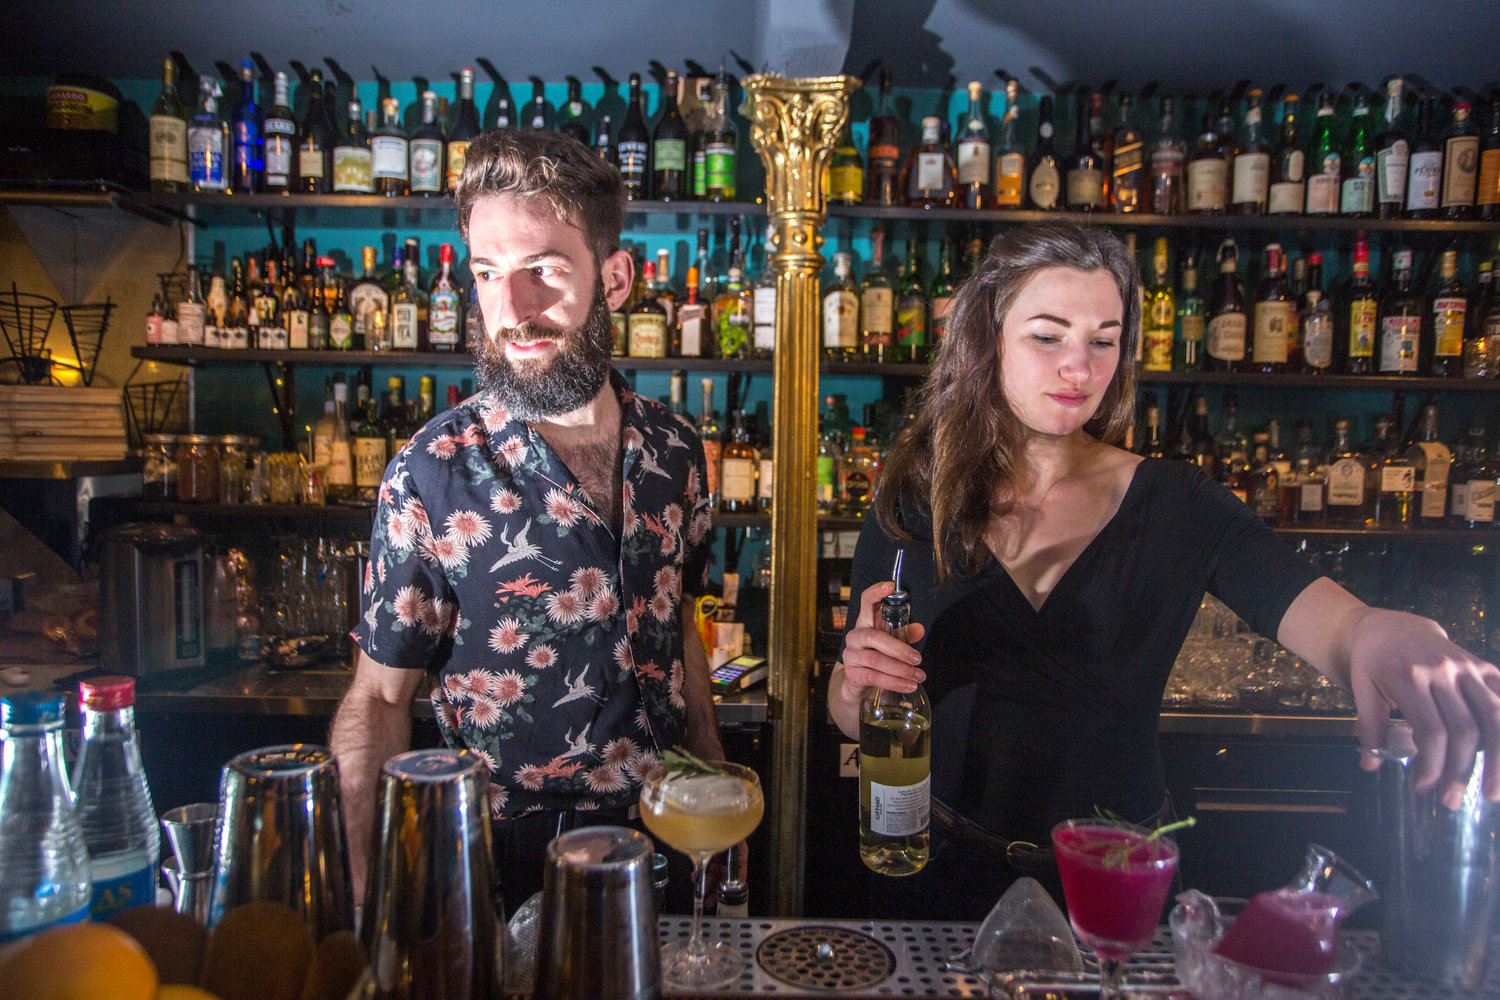 When sipping a cocktail crafted by Alexander Moats, left, or Sophia Elan, co-managers of The In Between, consumers are encouraged to enjoy the flavor and be transported to distant places and long-forgotten memories.